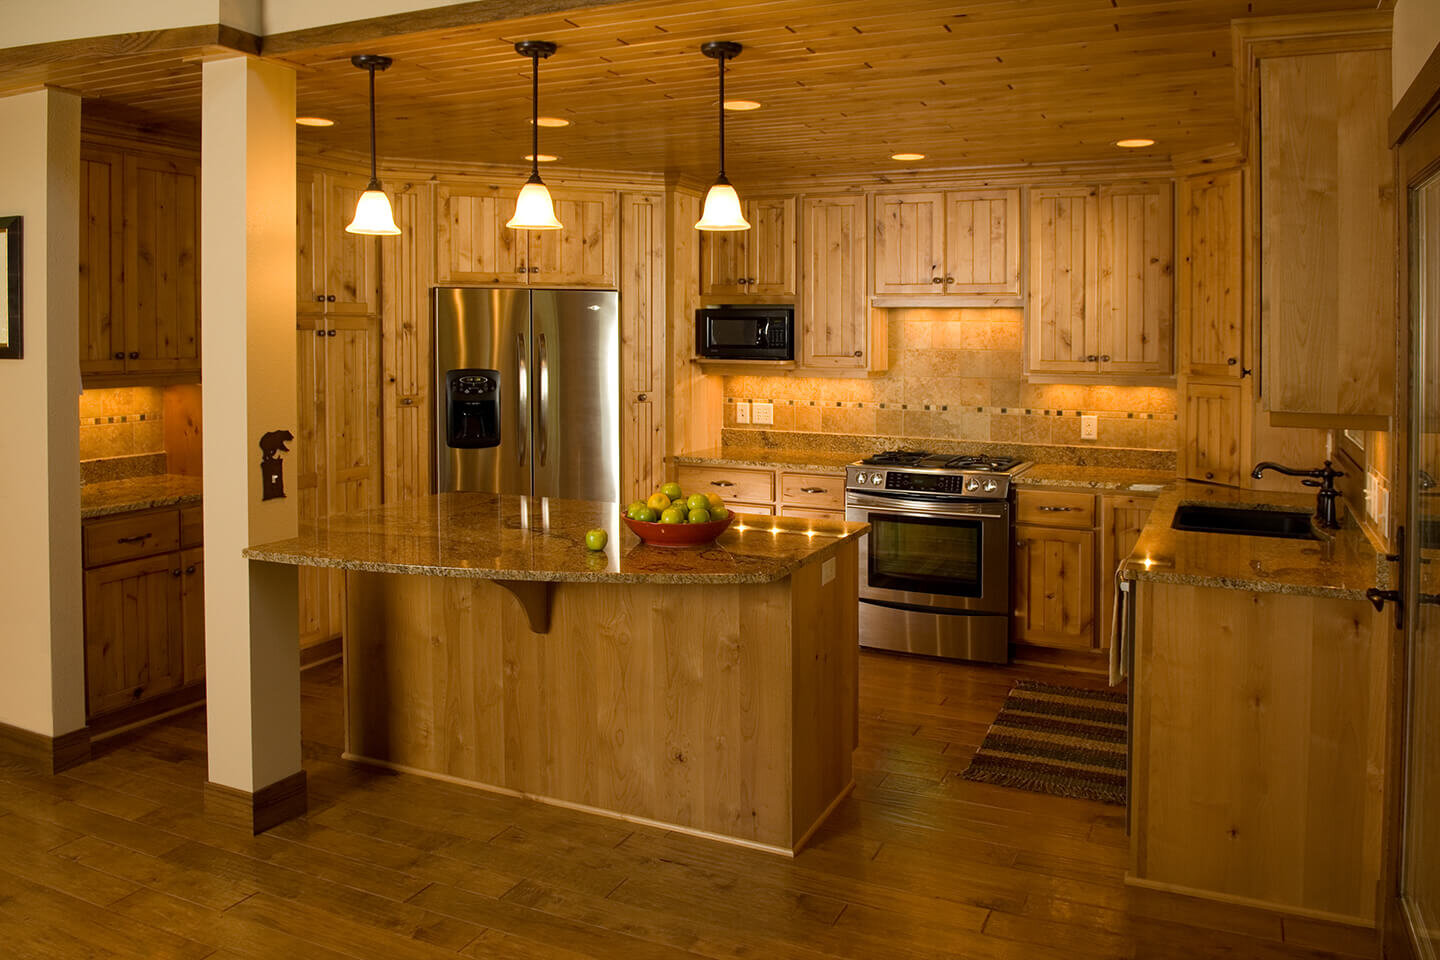 Kitchen with pine wood cabinetry